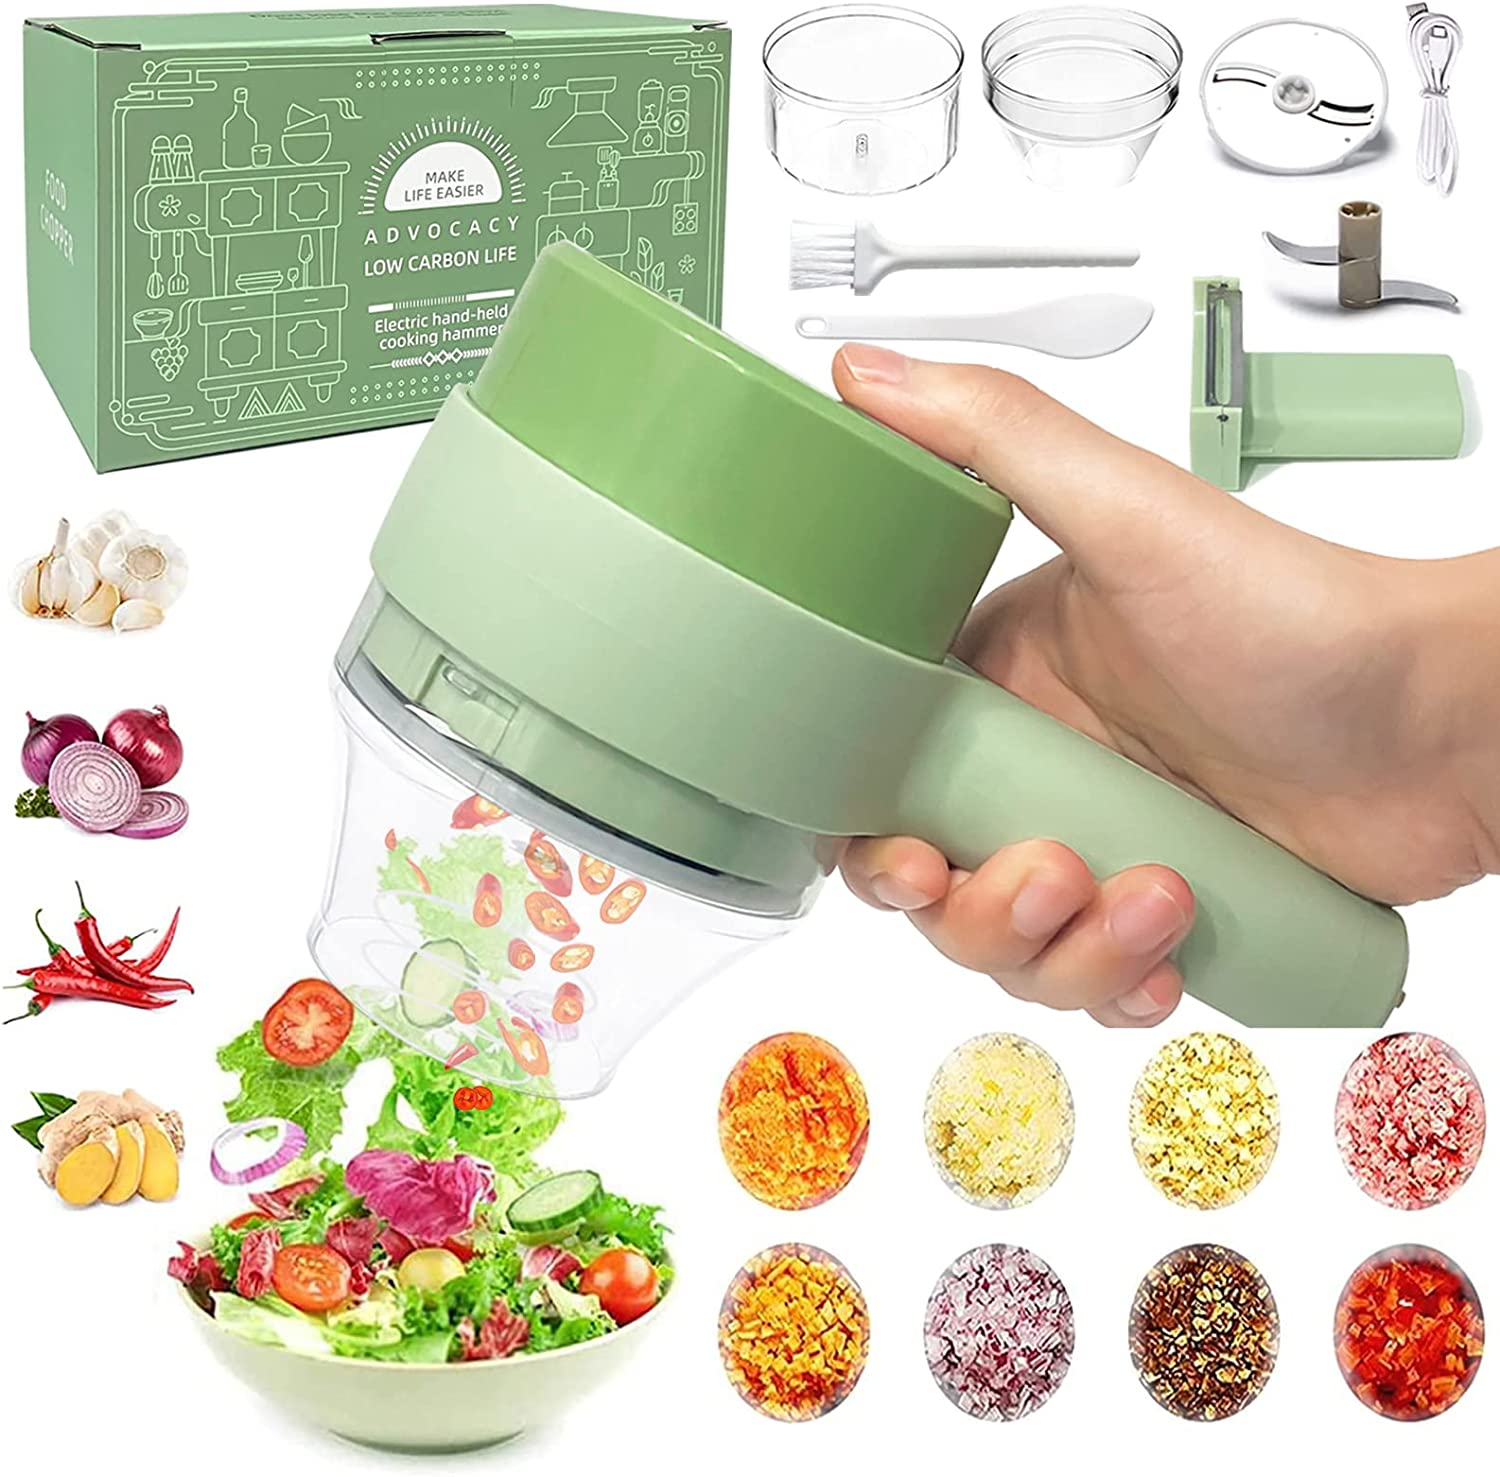  SERIZE 4 In 1 electric vegetable cutter set chili crusher  automatic garlic masher handheld vegetable cutter set kitchen tool: Home &  Kitchen